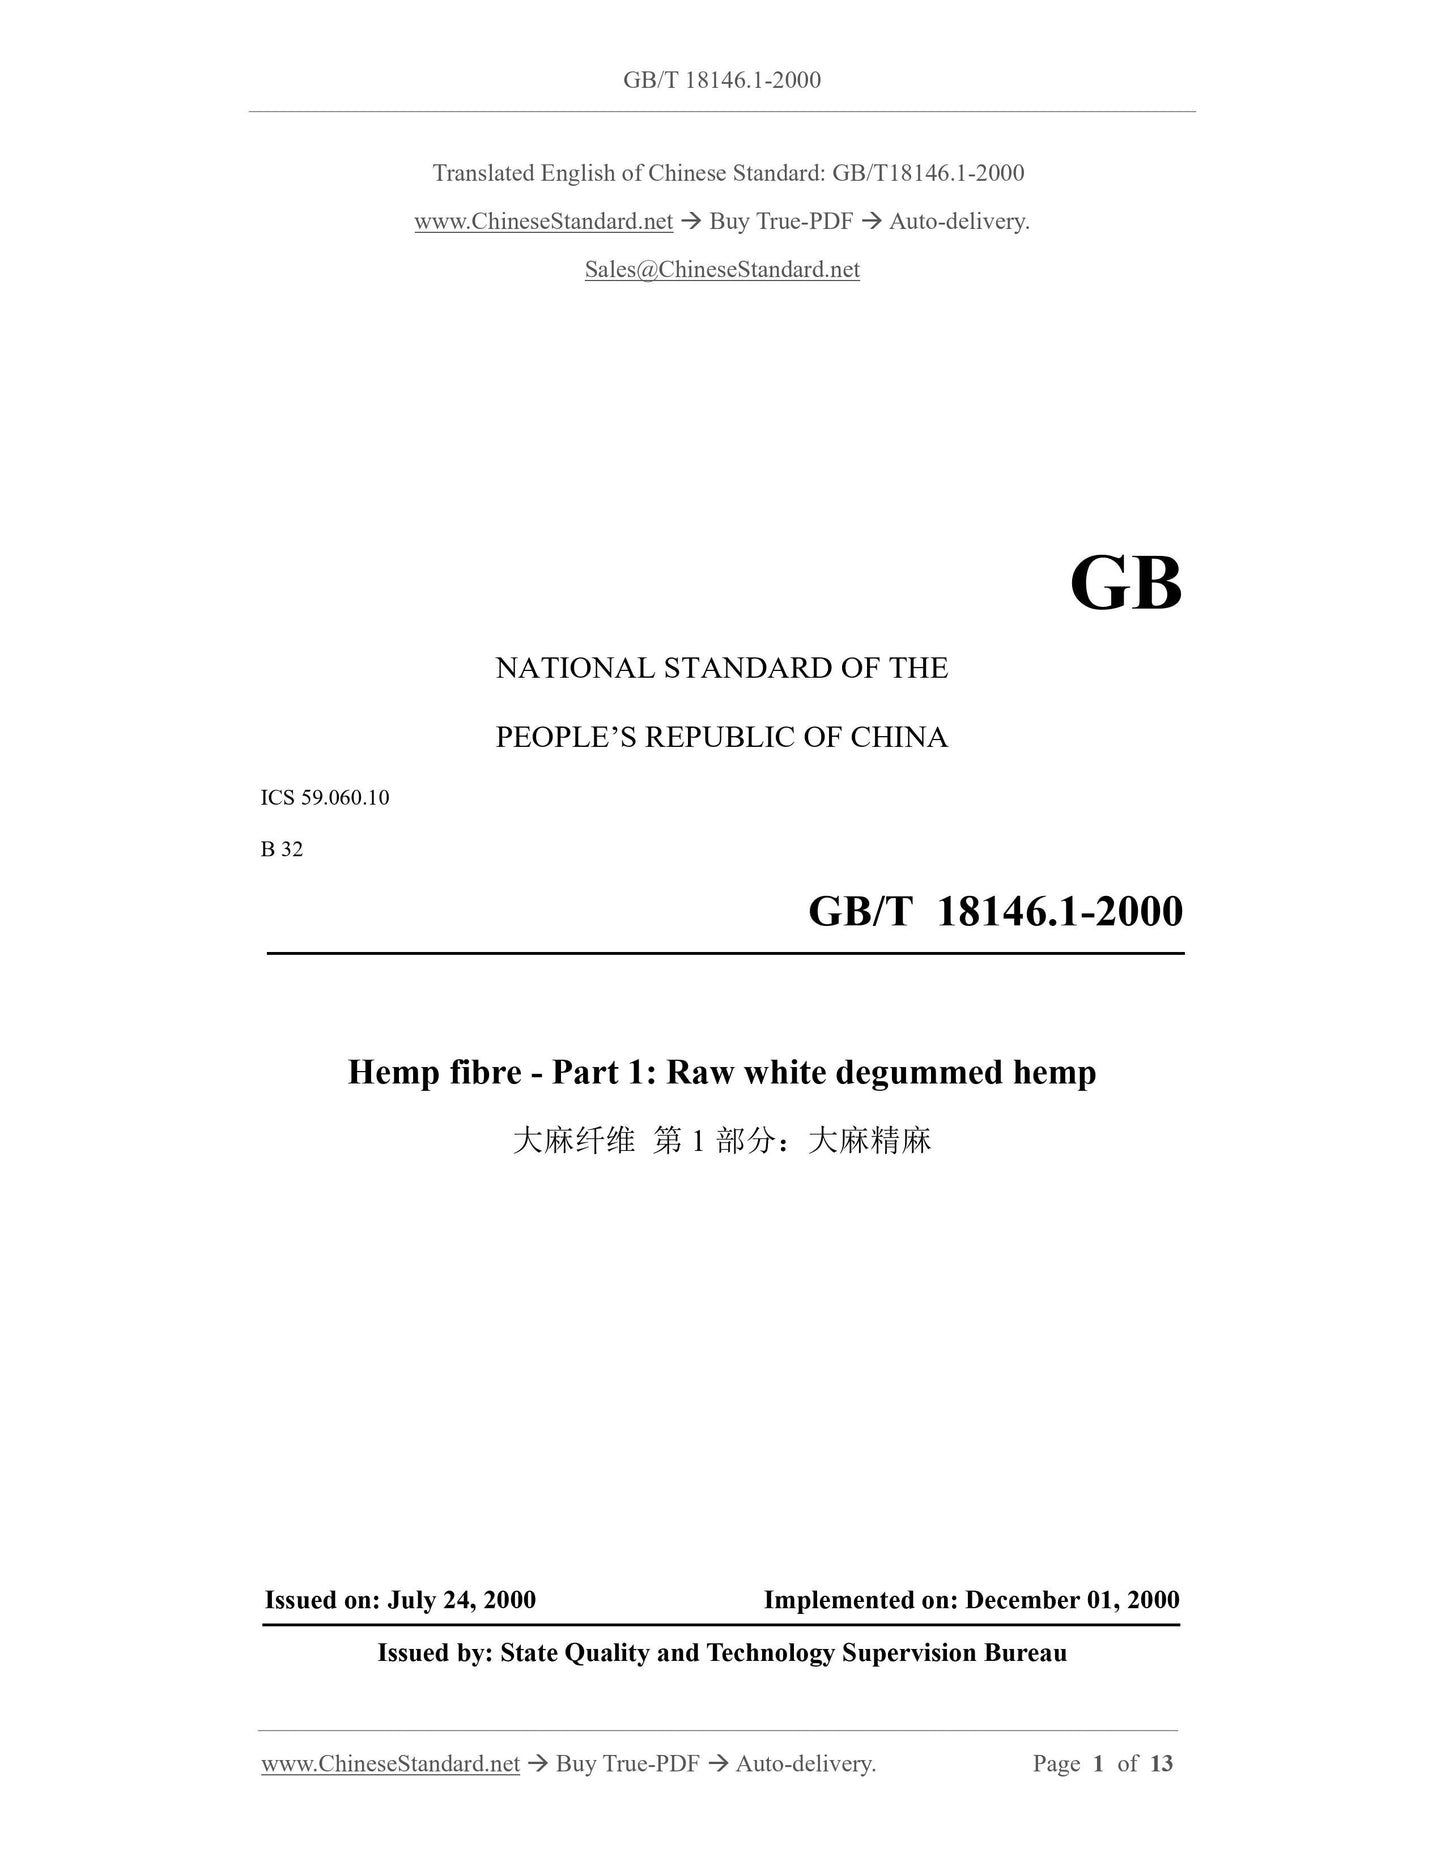 GB/T 18146.1-2000 Page 1